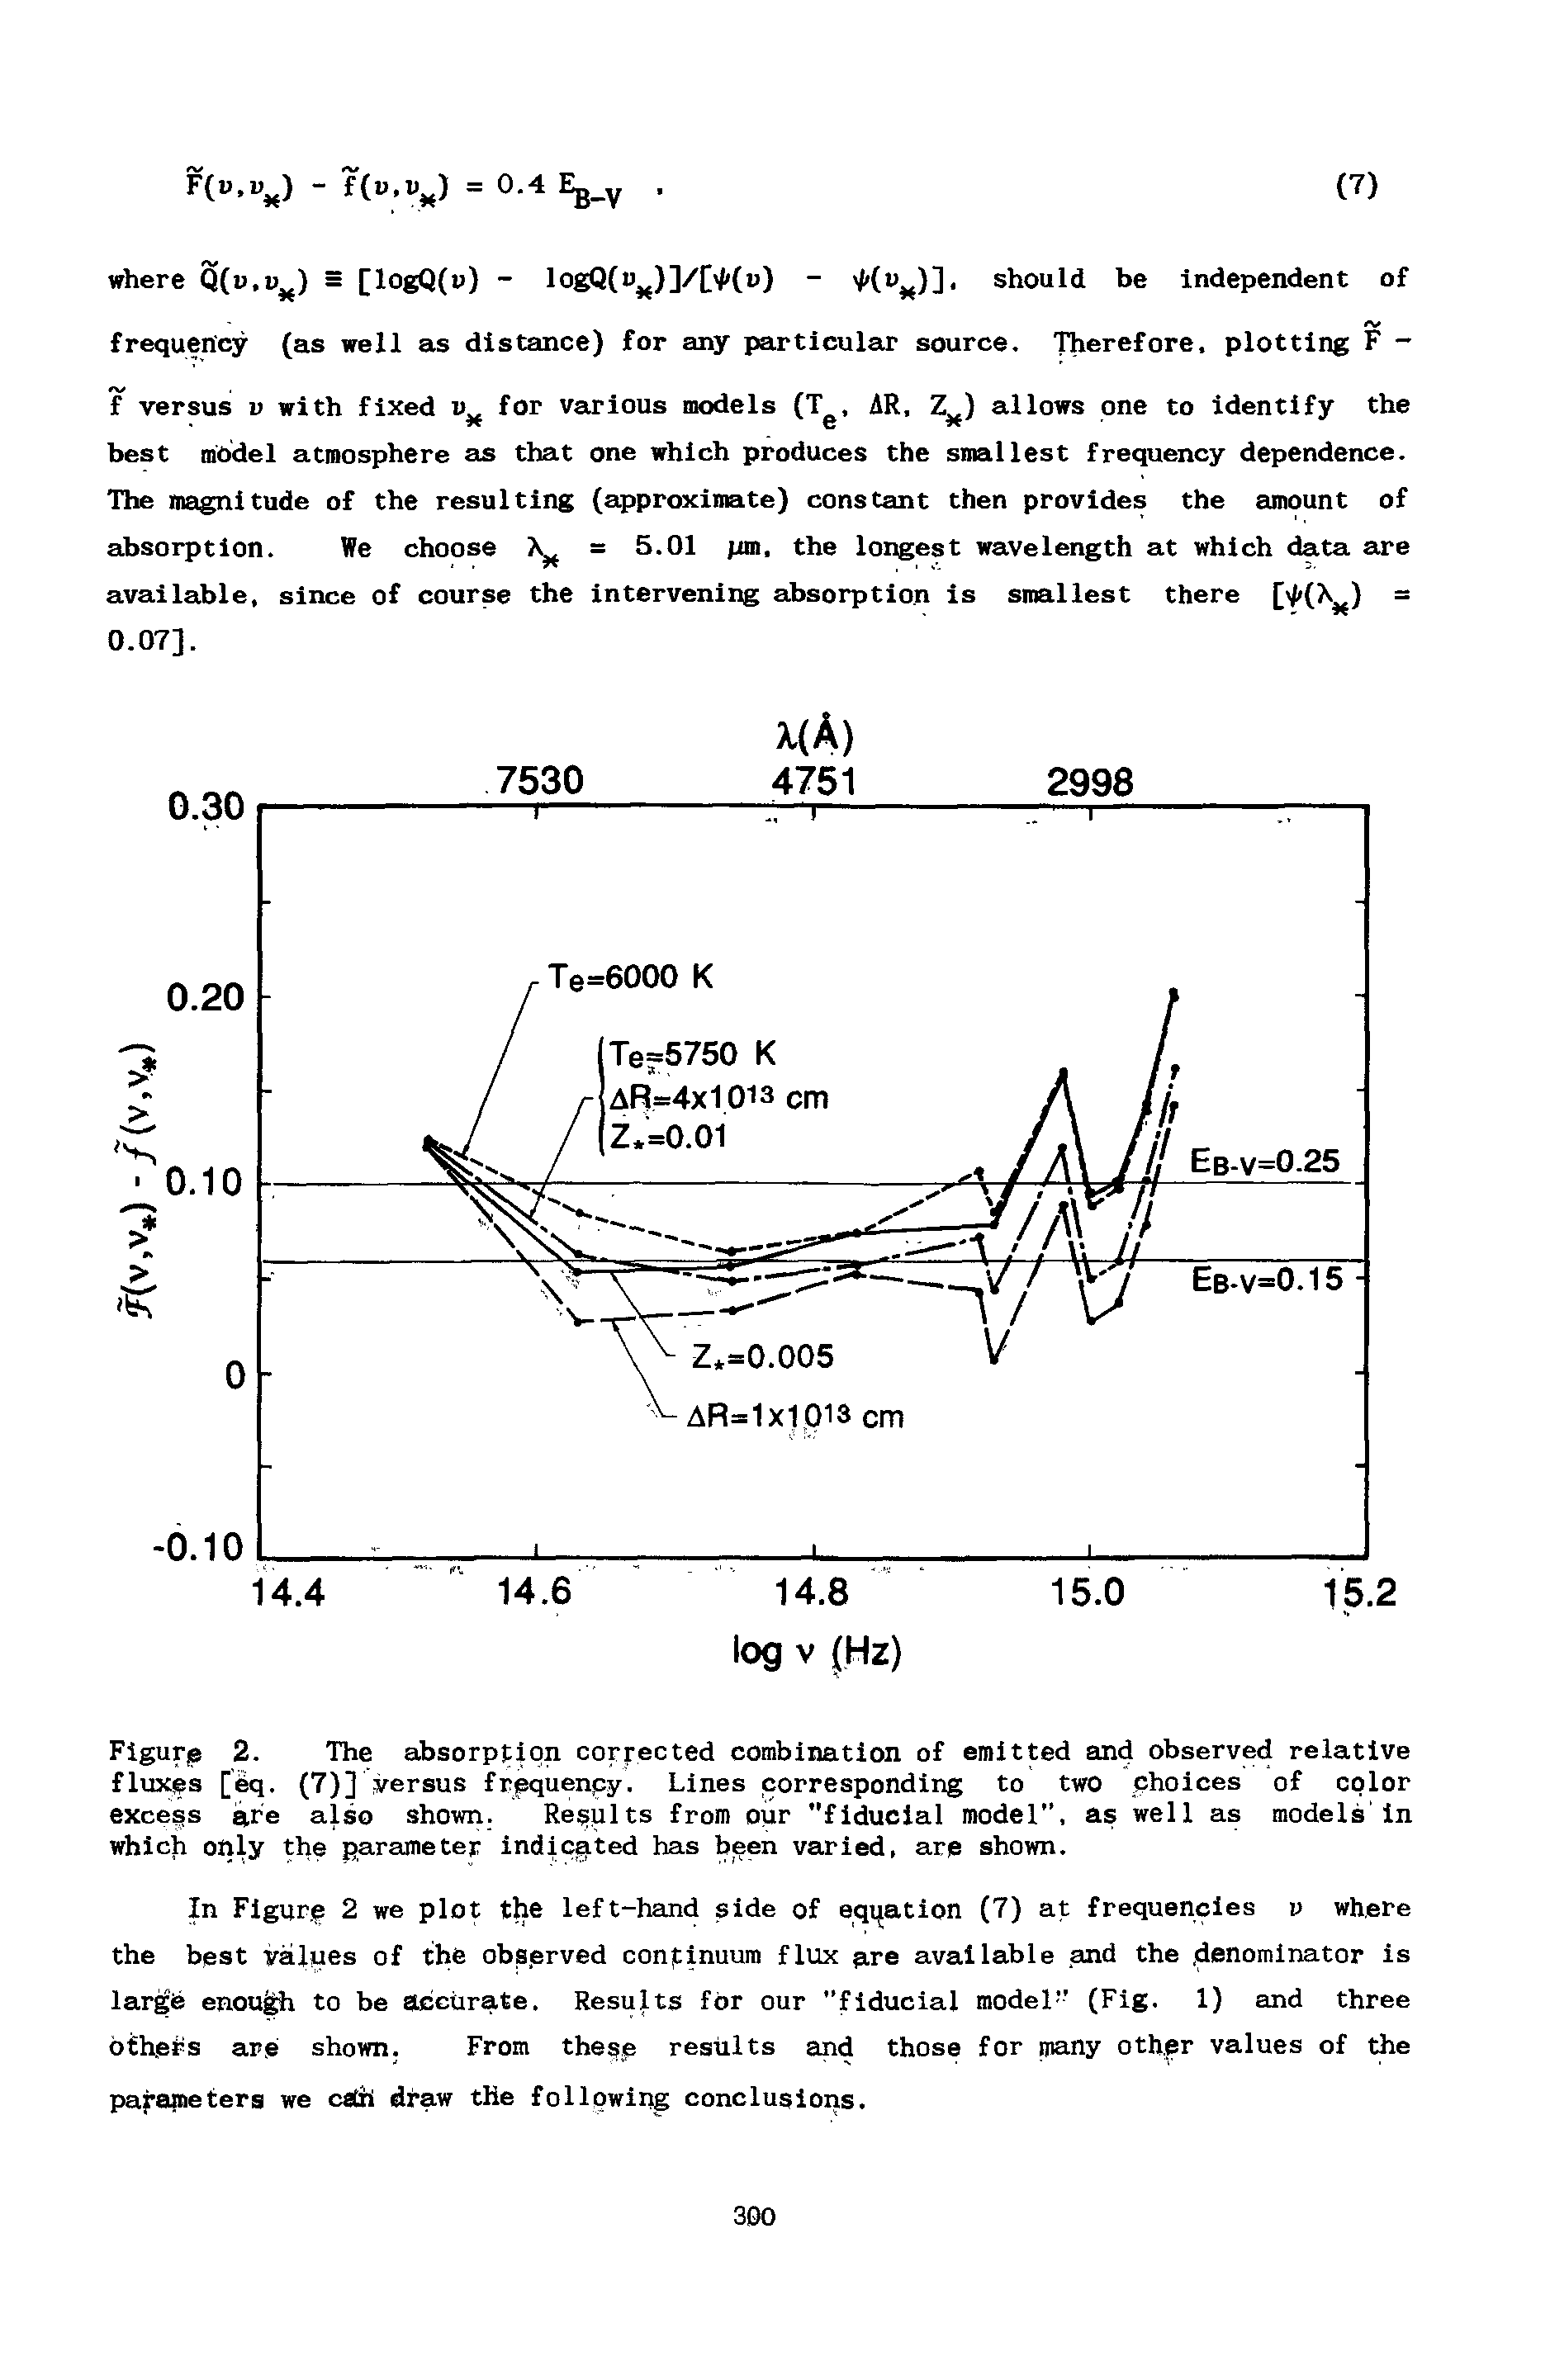 Figurp 2. The absorption corrected combination of emitted and observed relative fluxes [eq. (7)] versus frequency. Lines corresponding to two choices of color excess are also shown. Results from our "fiducial model", as well as models in which only the parameter indicated has been varied, are shown.